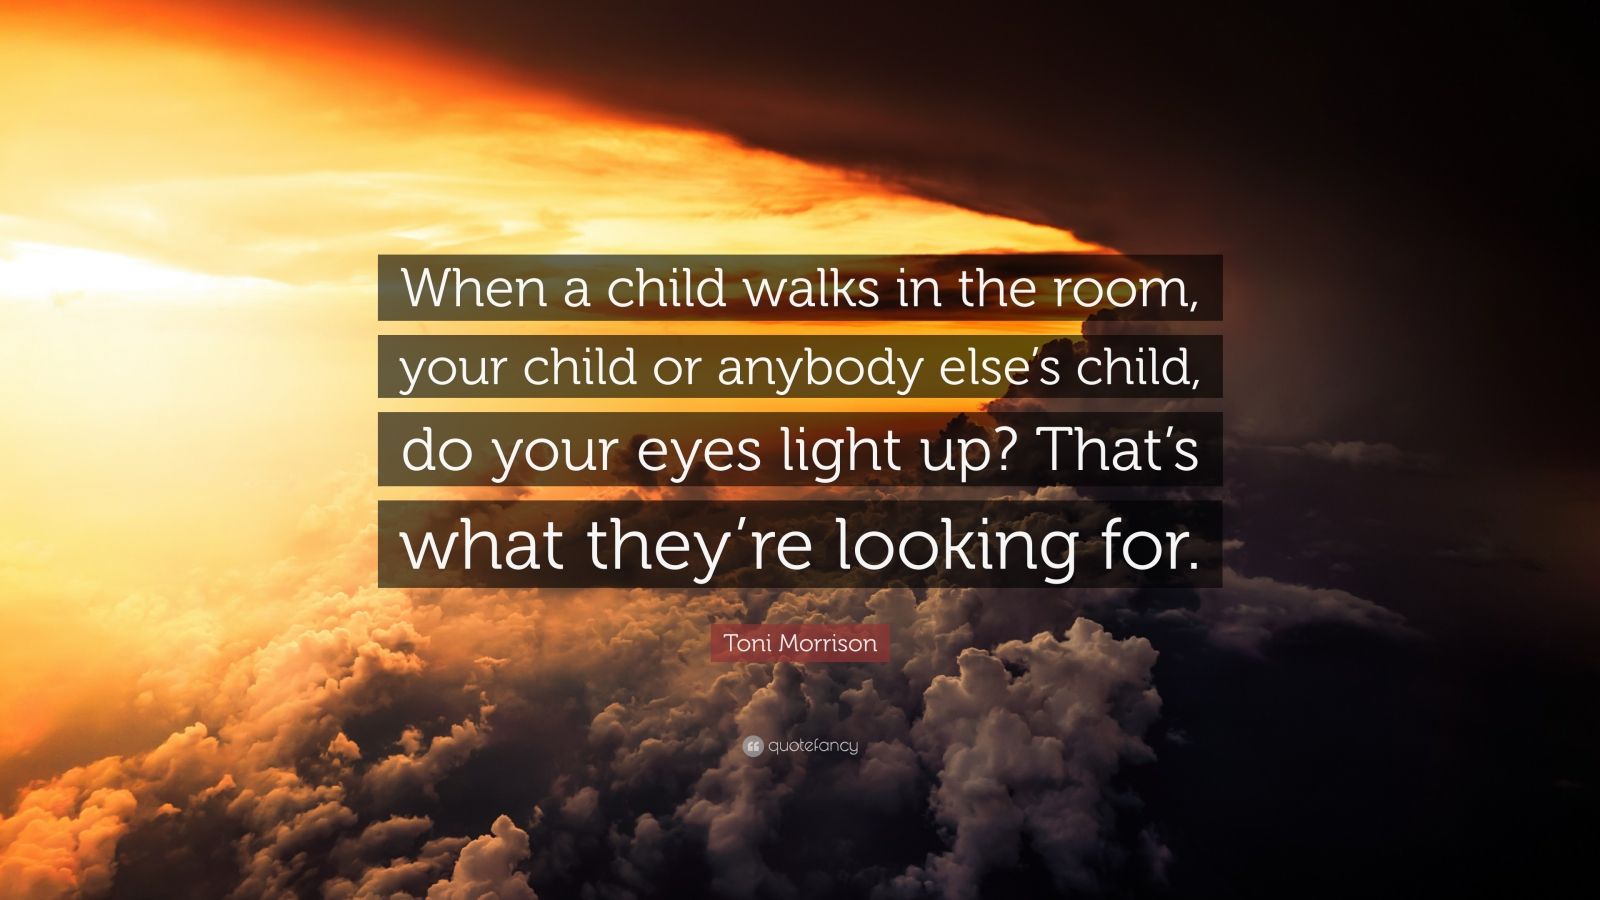 Toni Morrison Quote: “When a child walks in the room, your child or